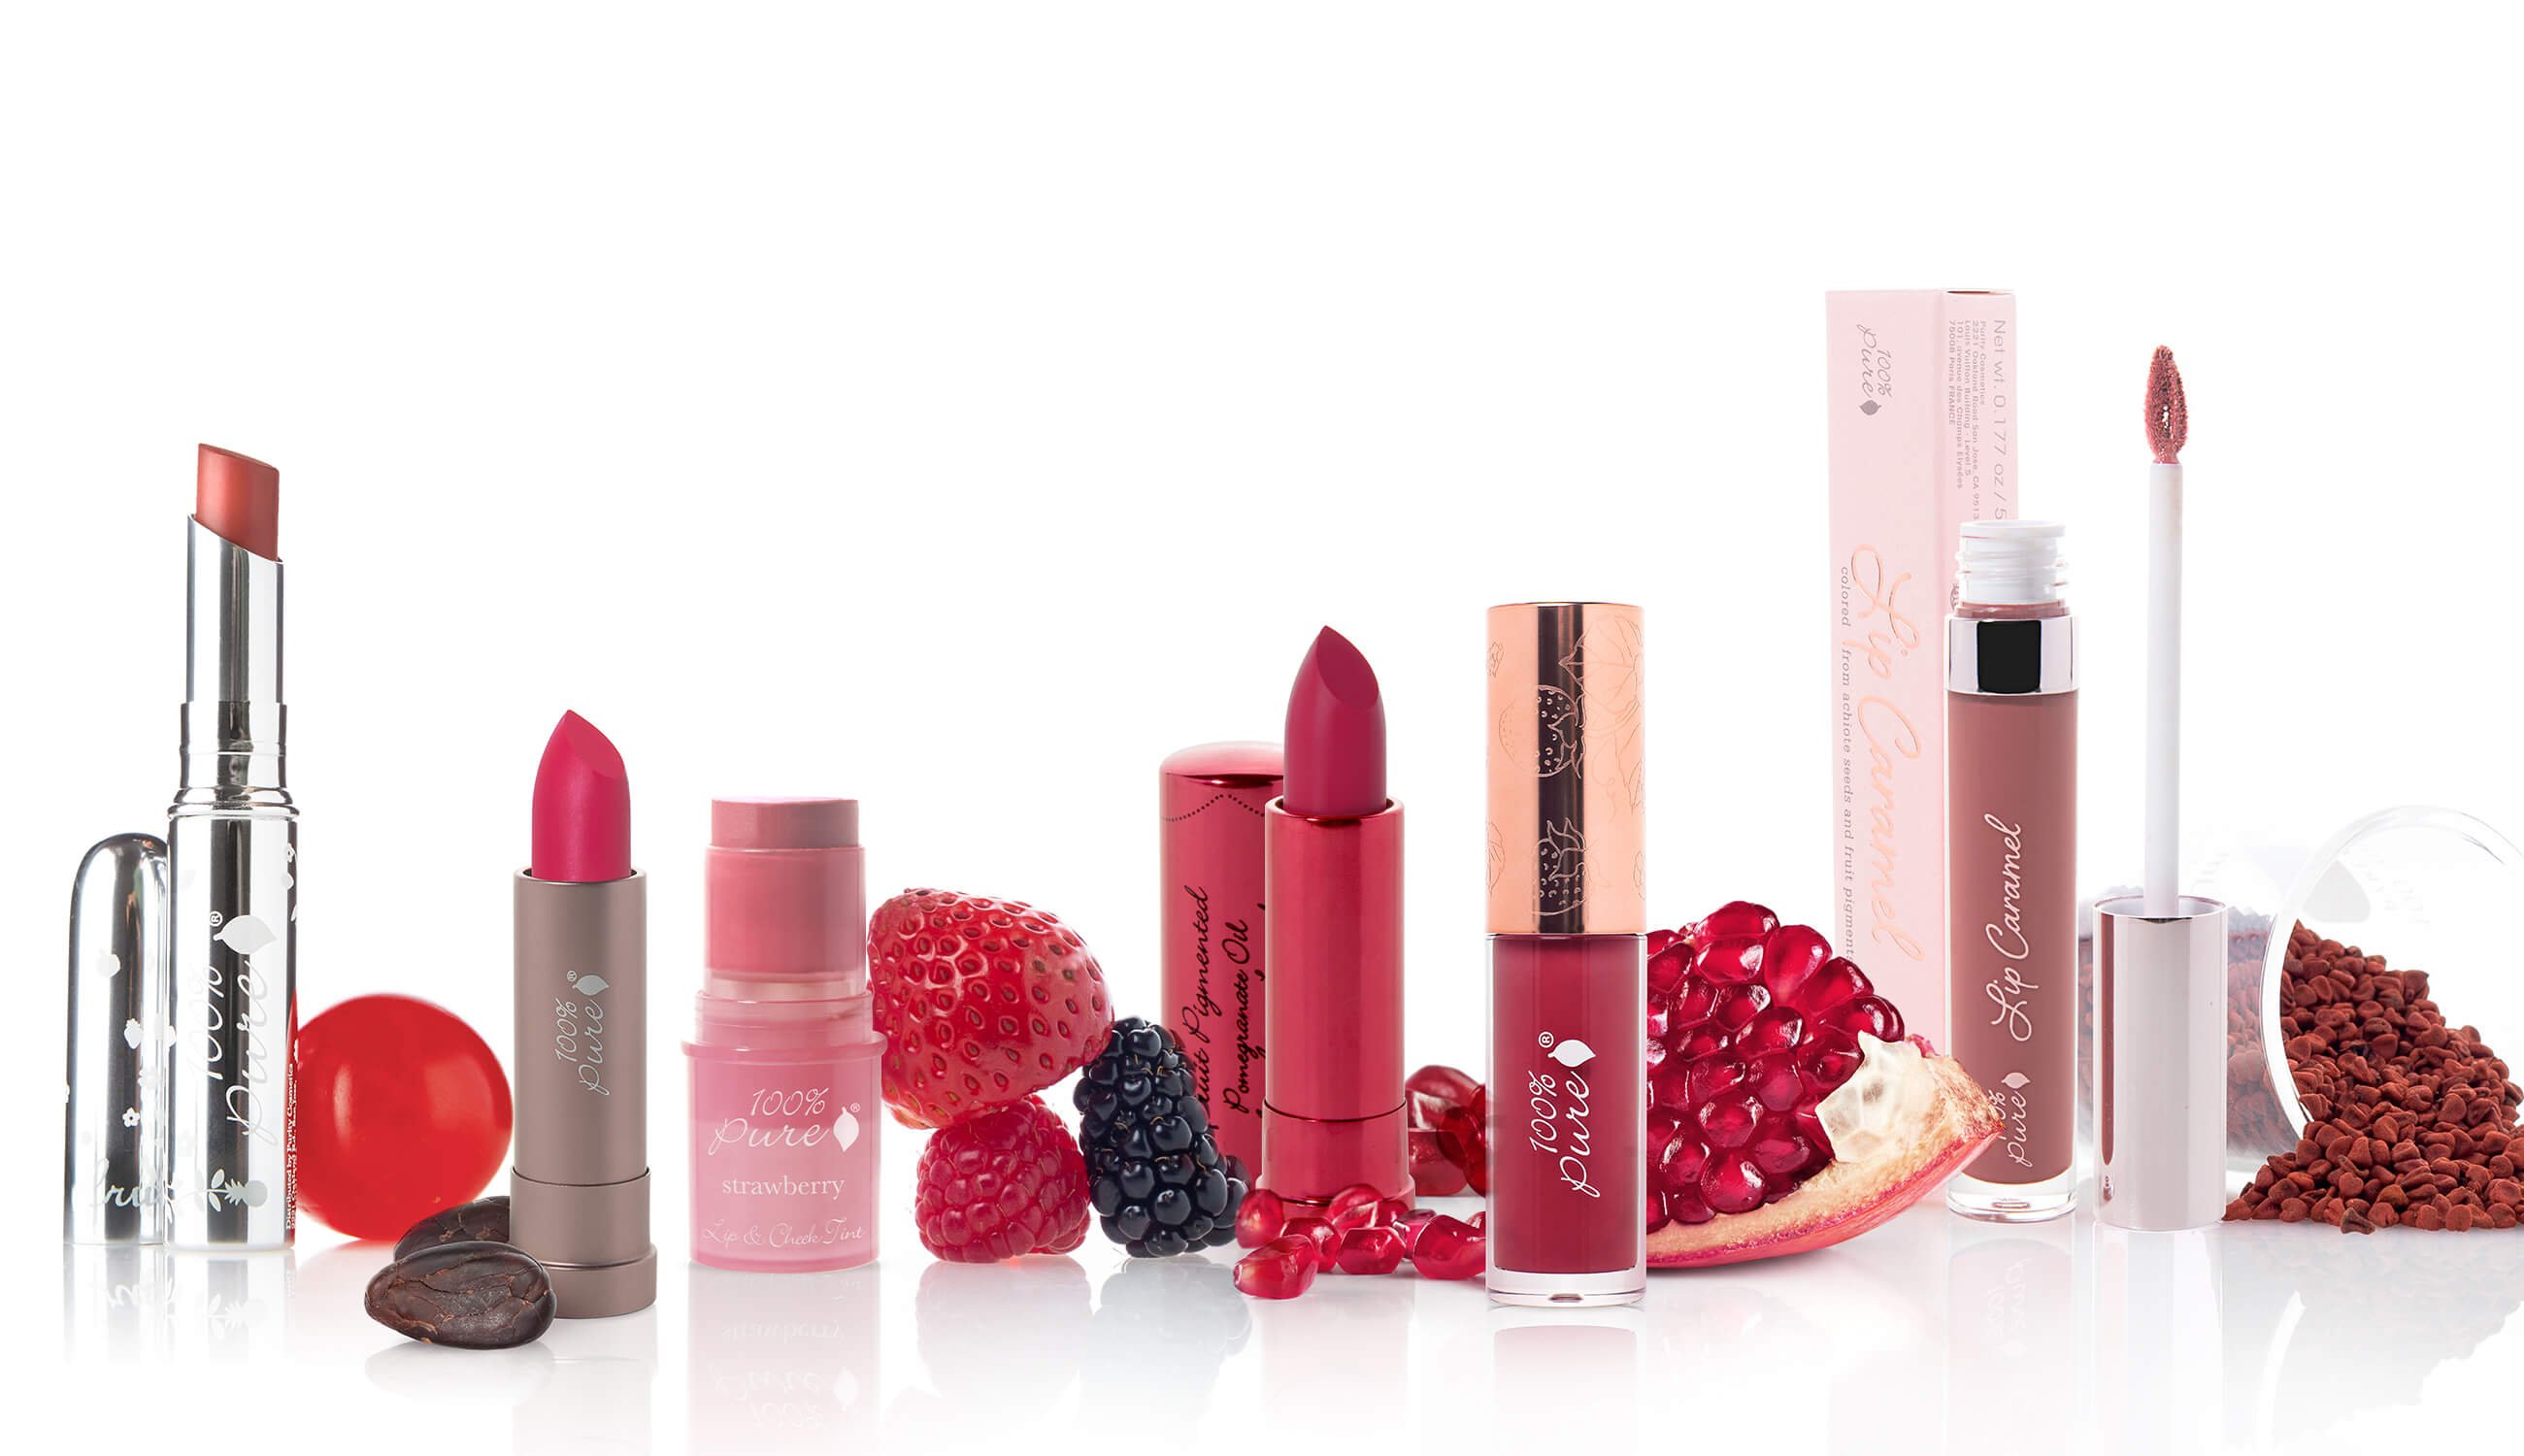 Lipstick image with fruits